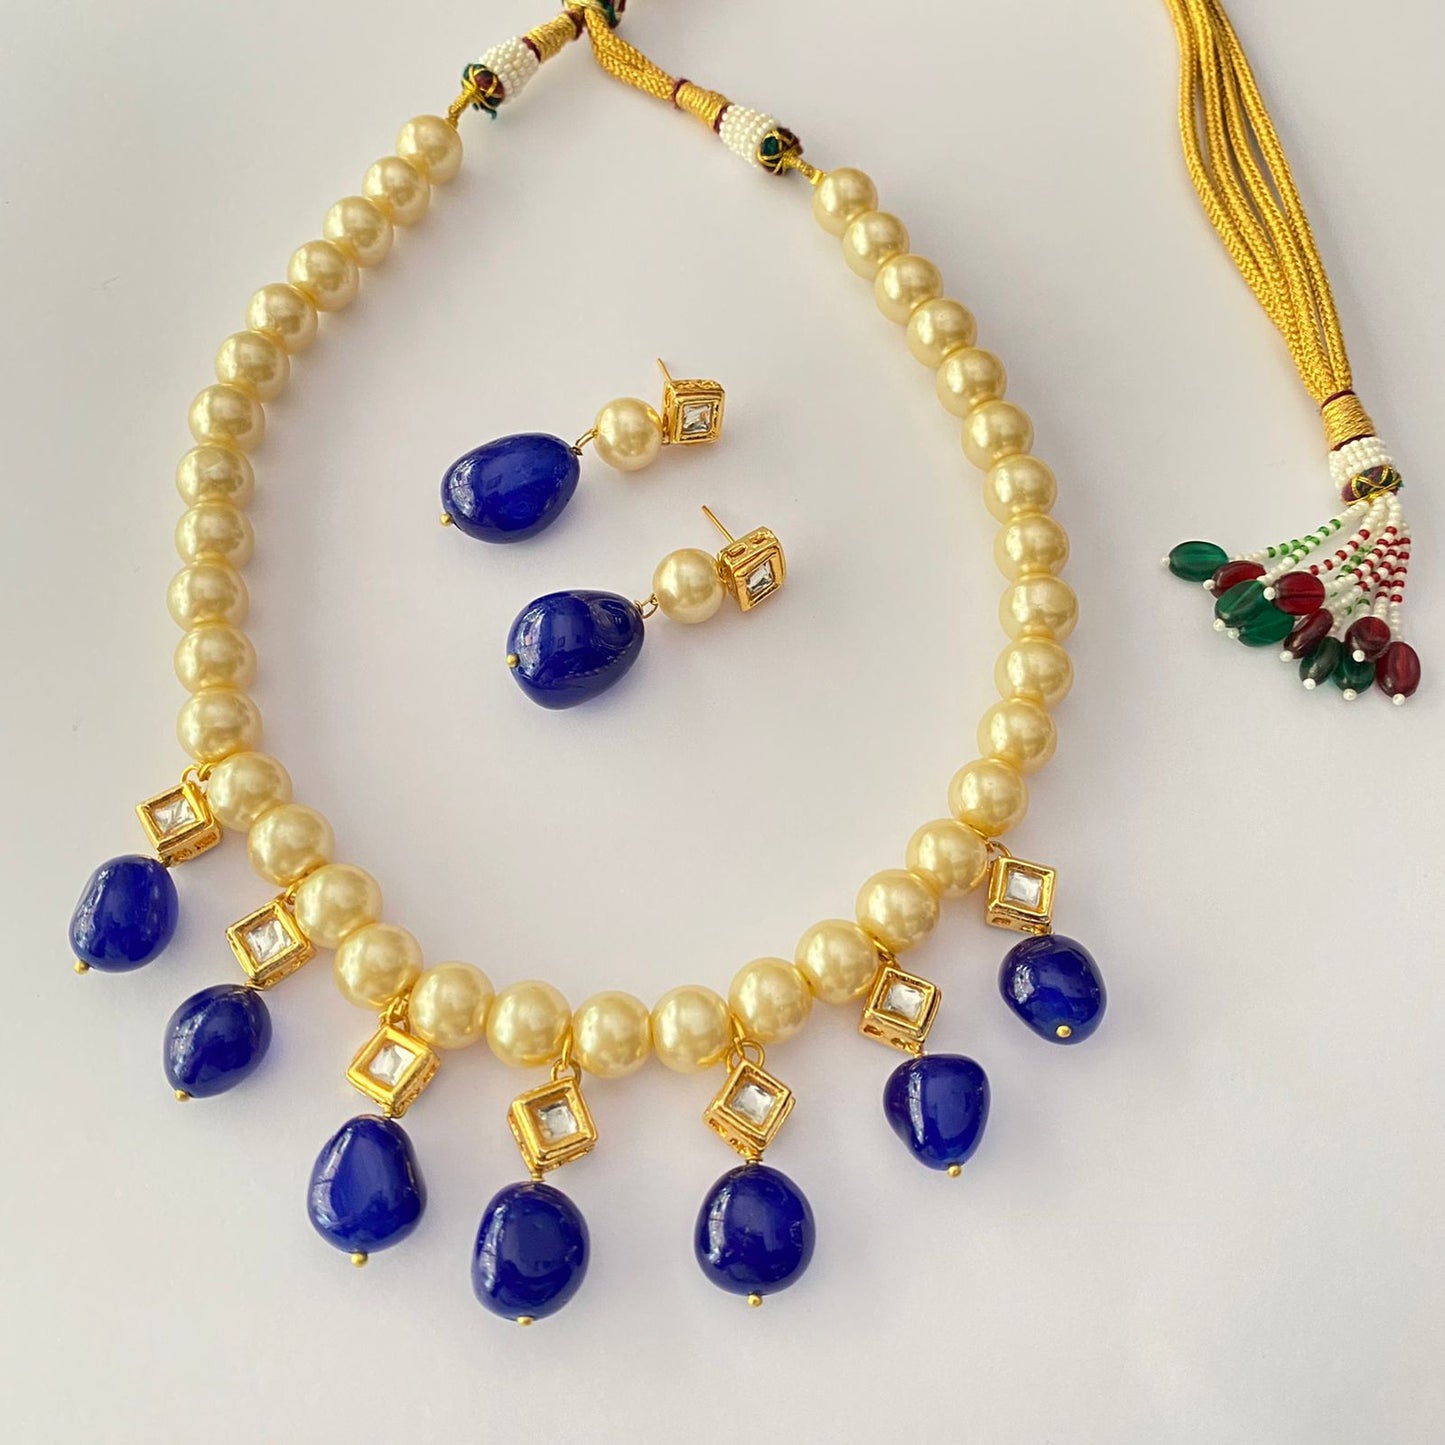 OFF WHITE PEARL BLUE SAPPHIRE KUNDAN GOLD PLATED NECKLACE WITH EARRING